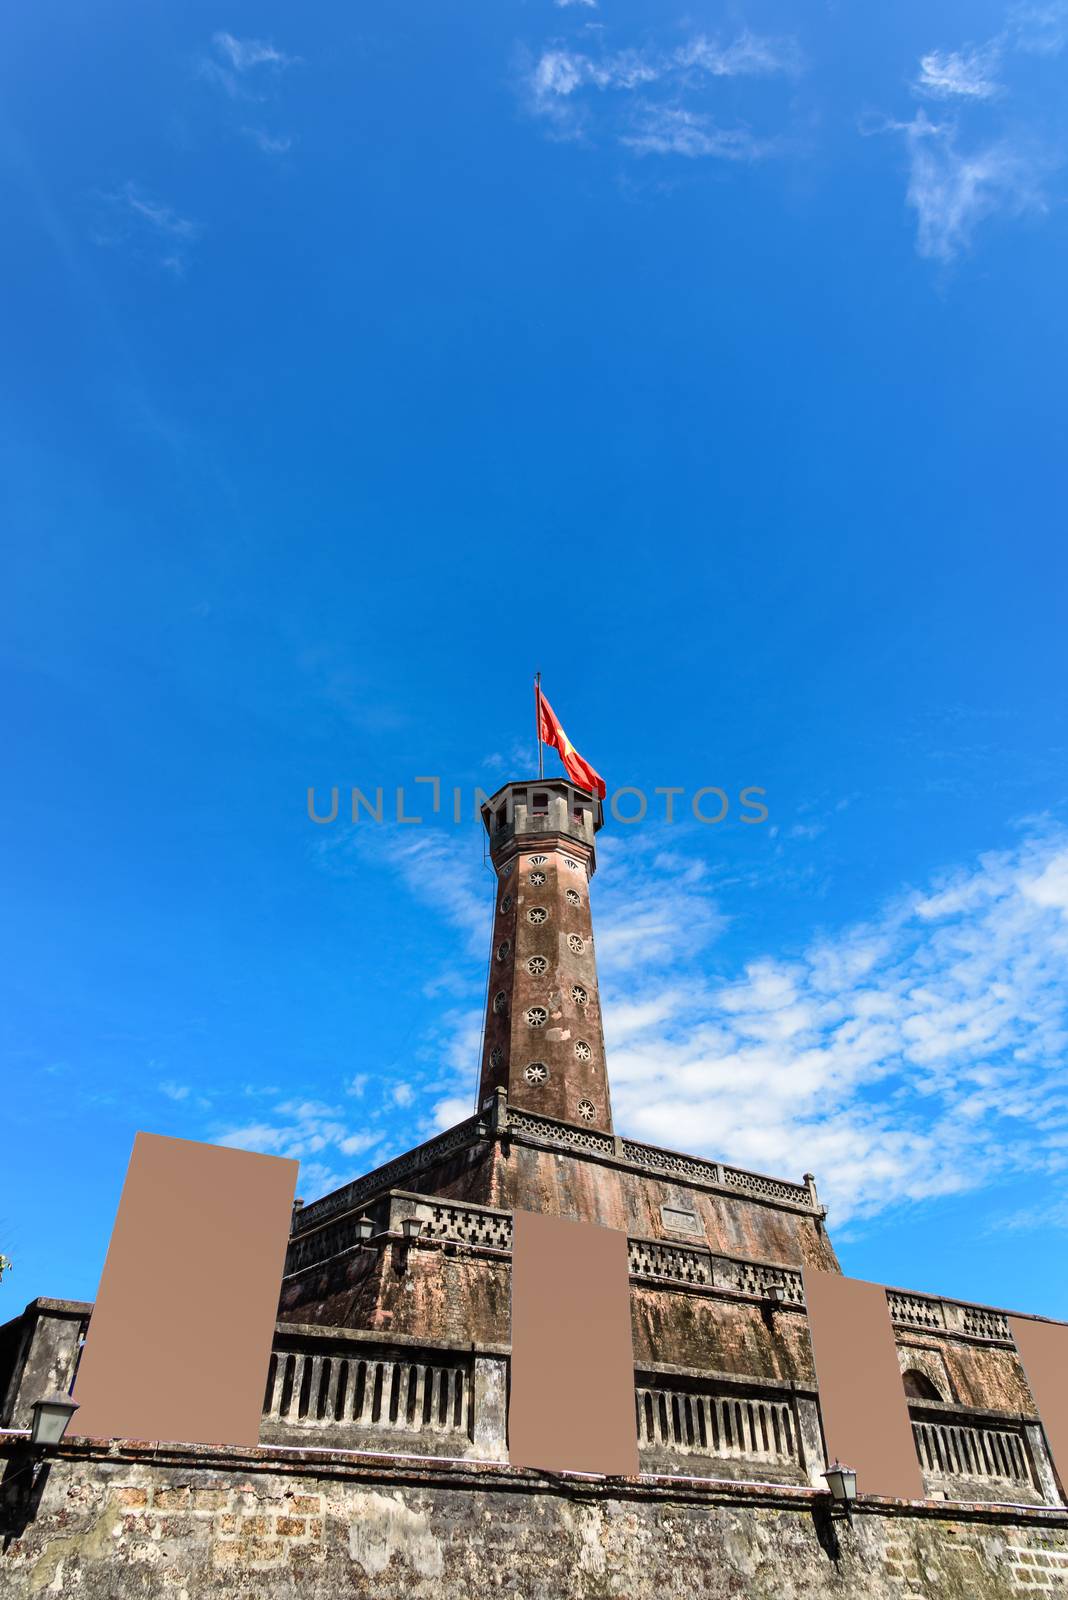 Hanoi flag tower with flying Vietnamese flag and empty standing billboard cloud blue sky by trongnguyen